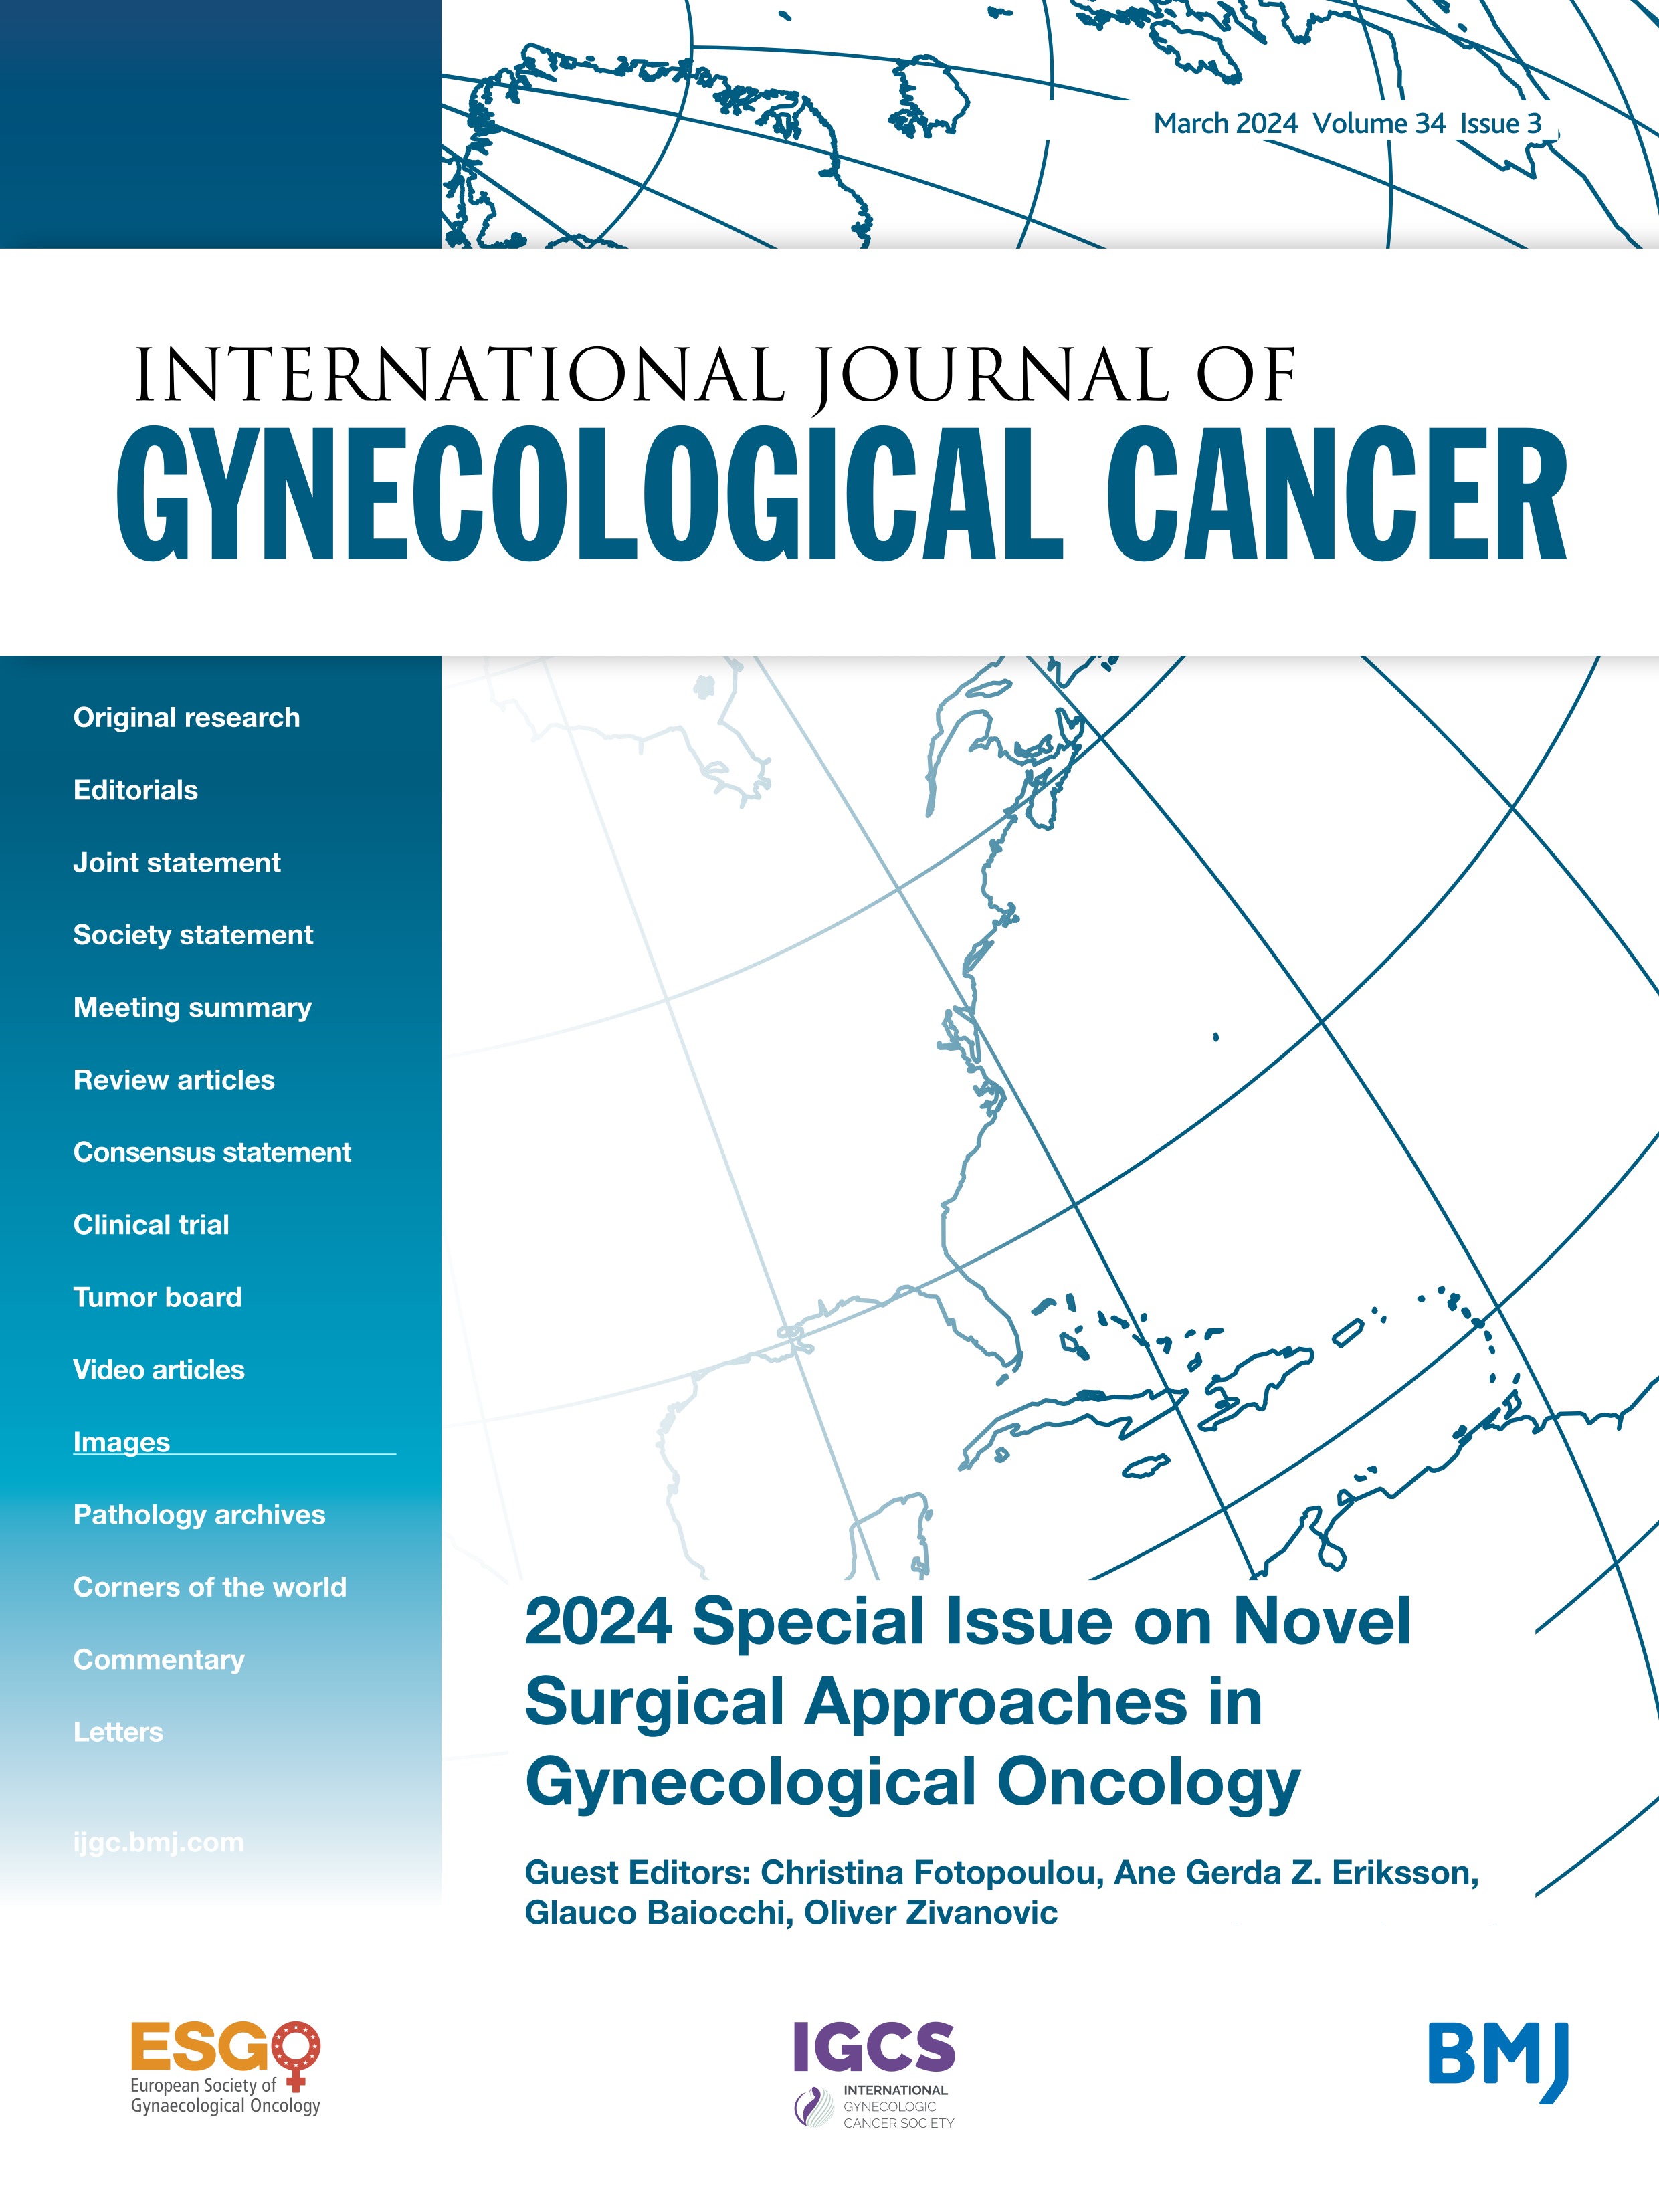 Surgery for gynecological cancers in the era of personalized medicine: a novel paradigm